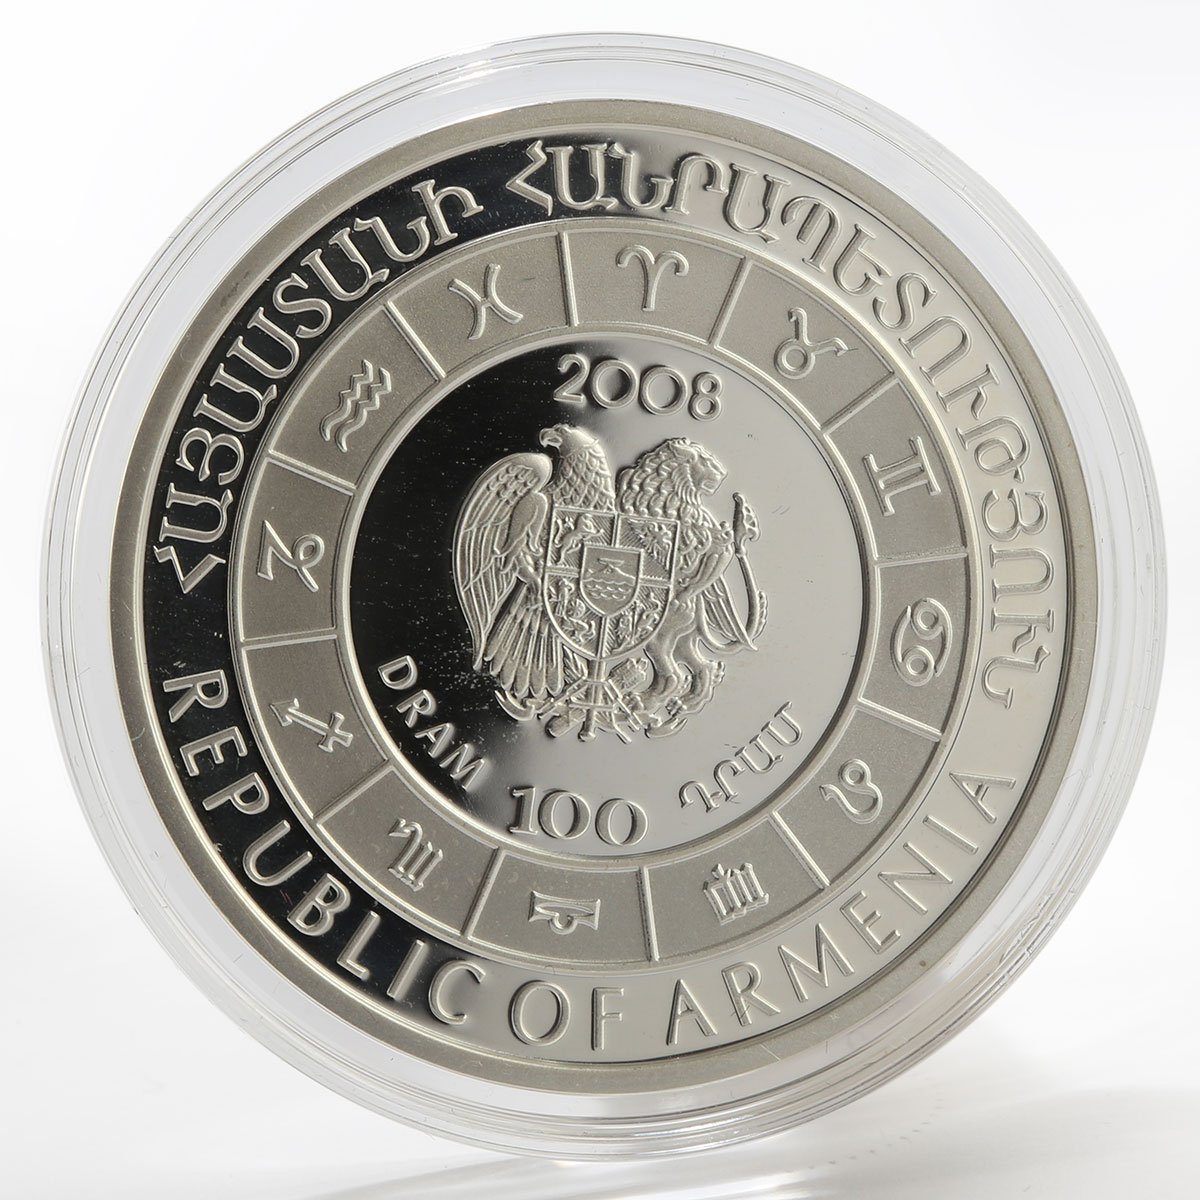 Armenia 100 dram Signs of Zodiac Cancer proof silver coin 2008